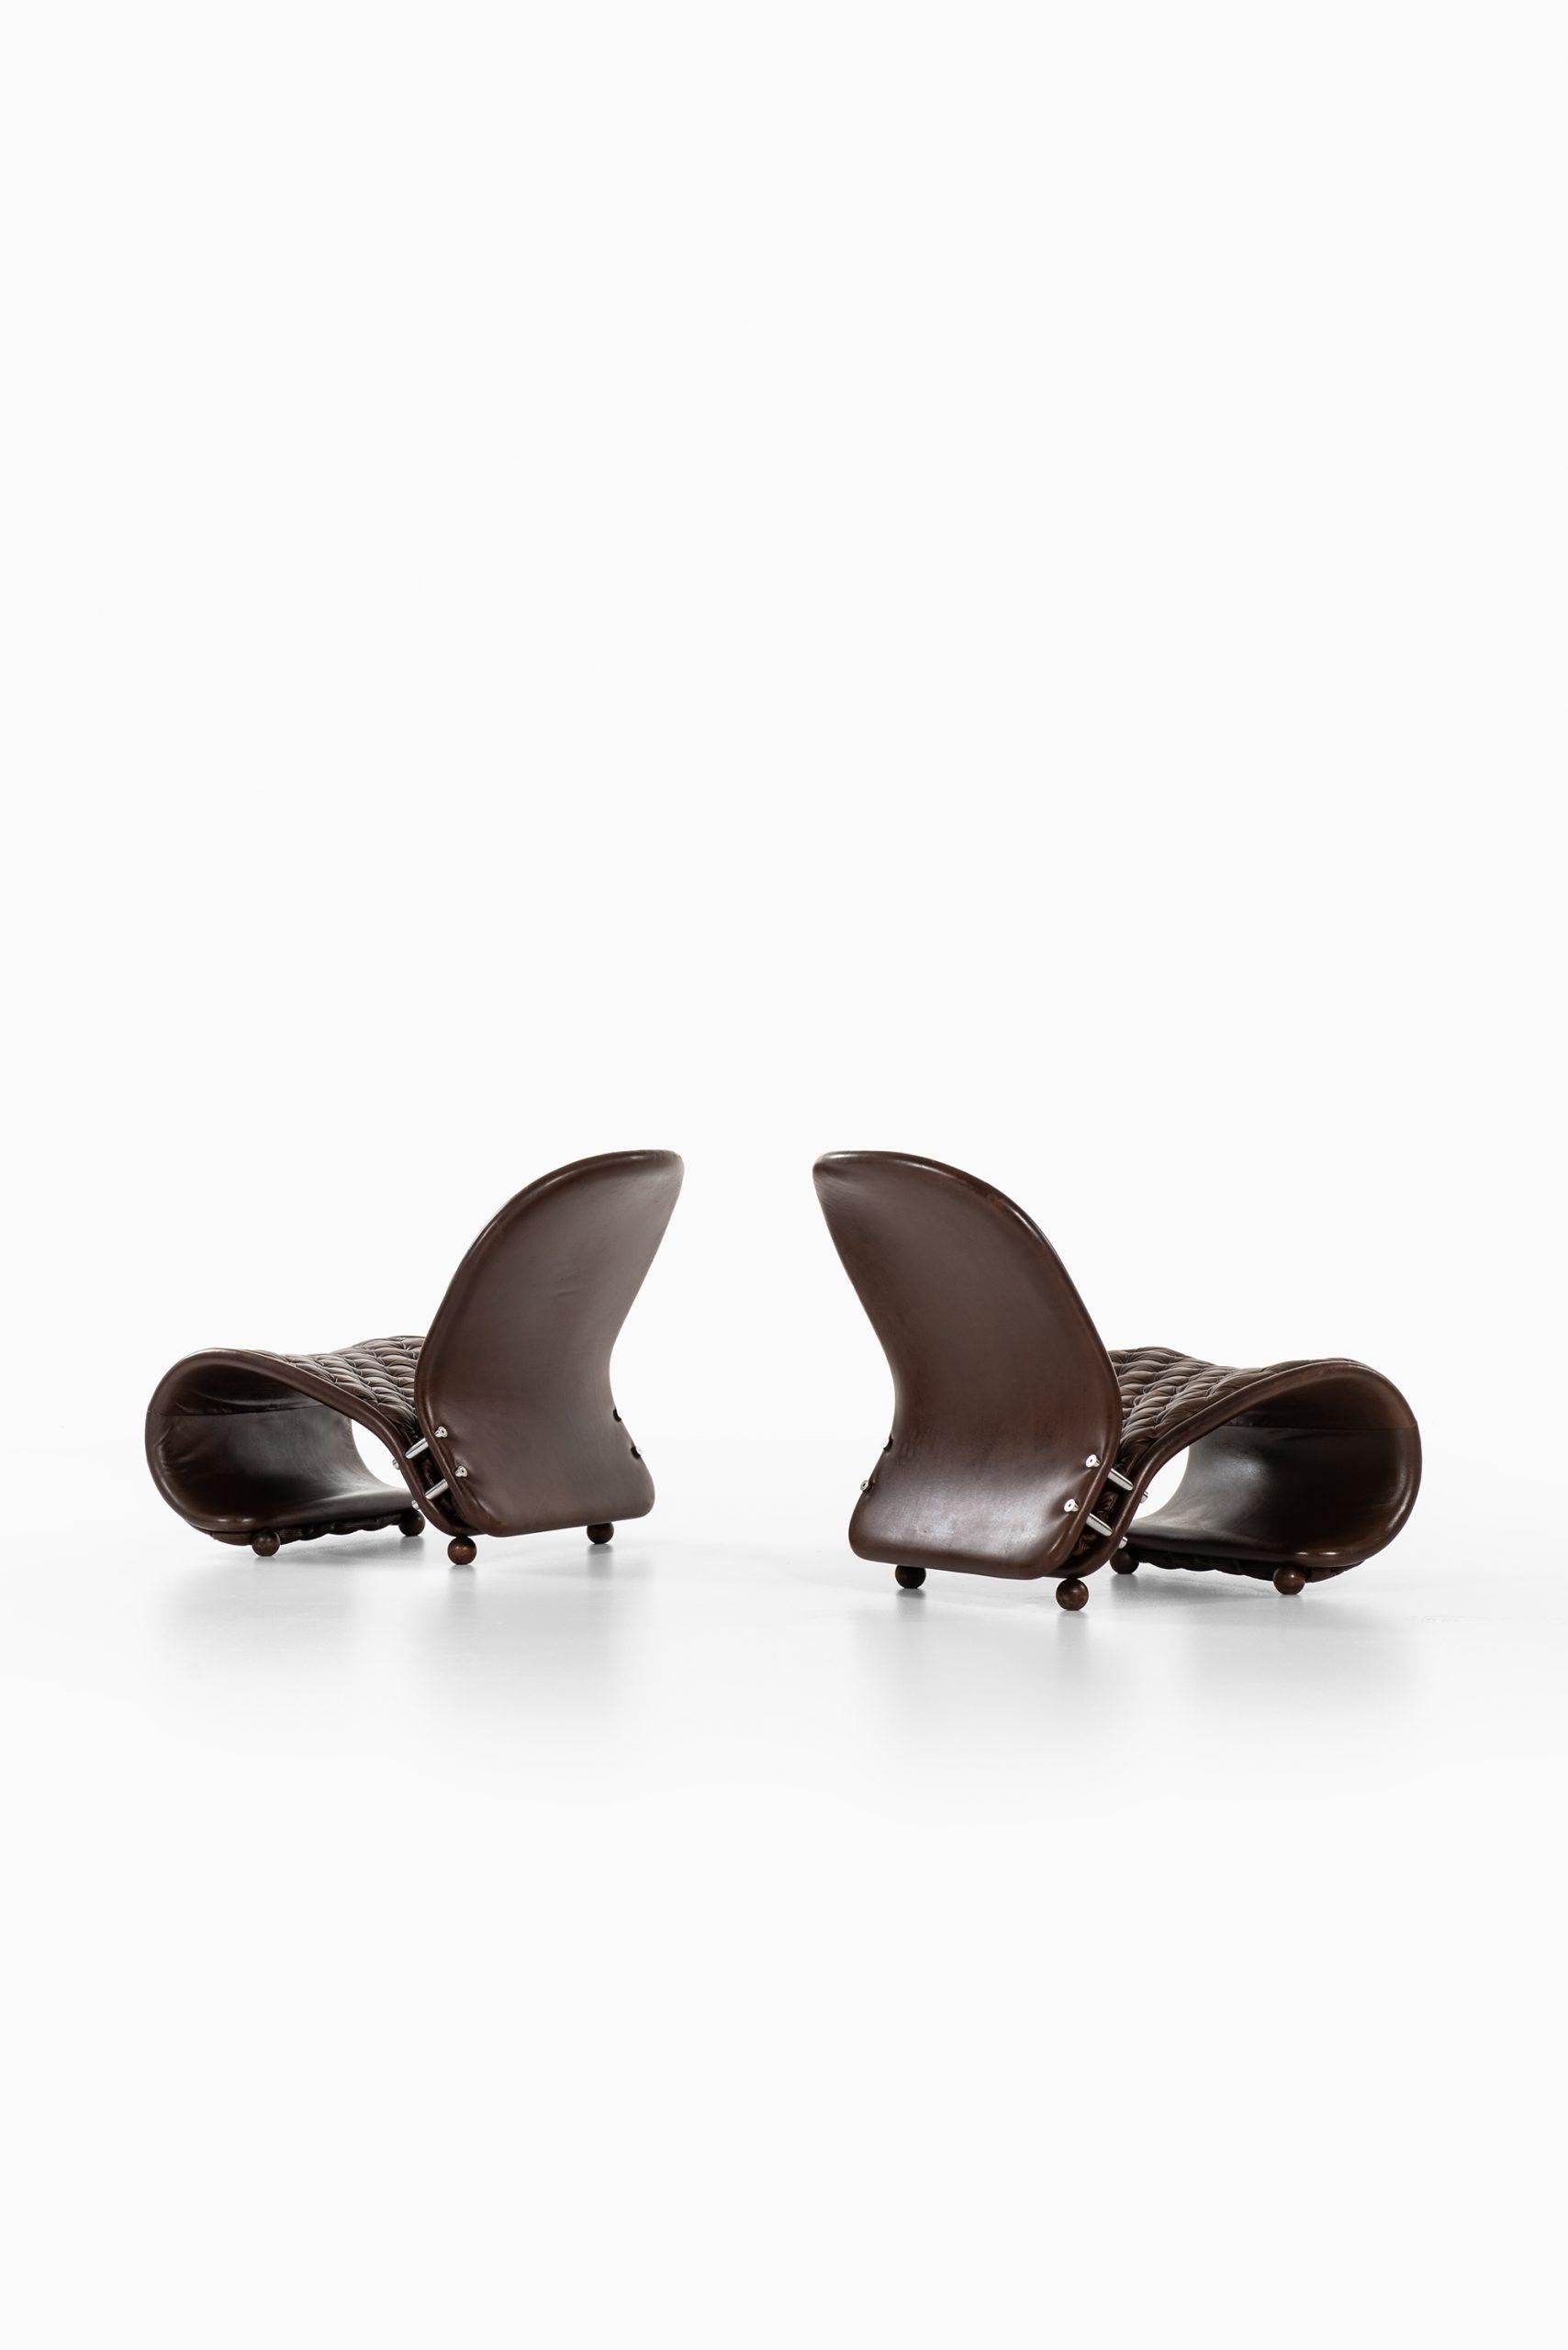 Late 20th Century Verner Panton Easy Chairs Model 'System 1-2-3' by Fritz Hansen in Denmark